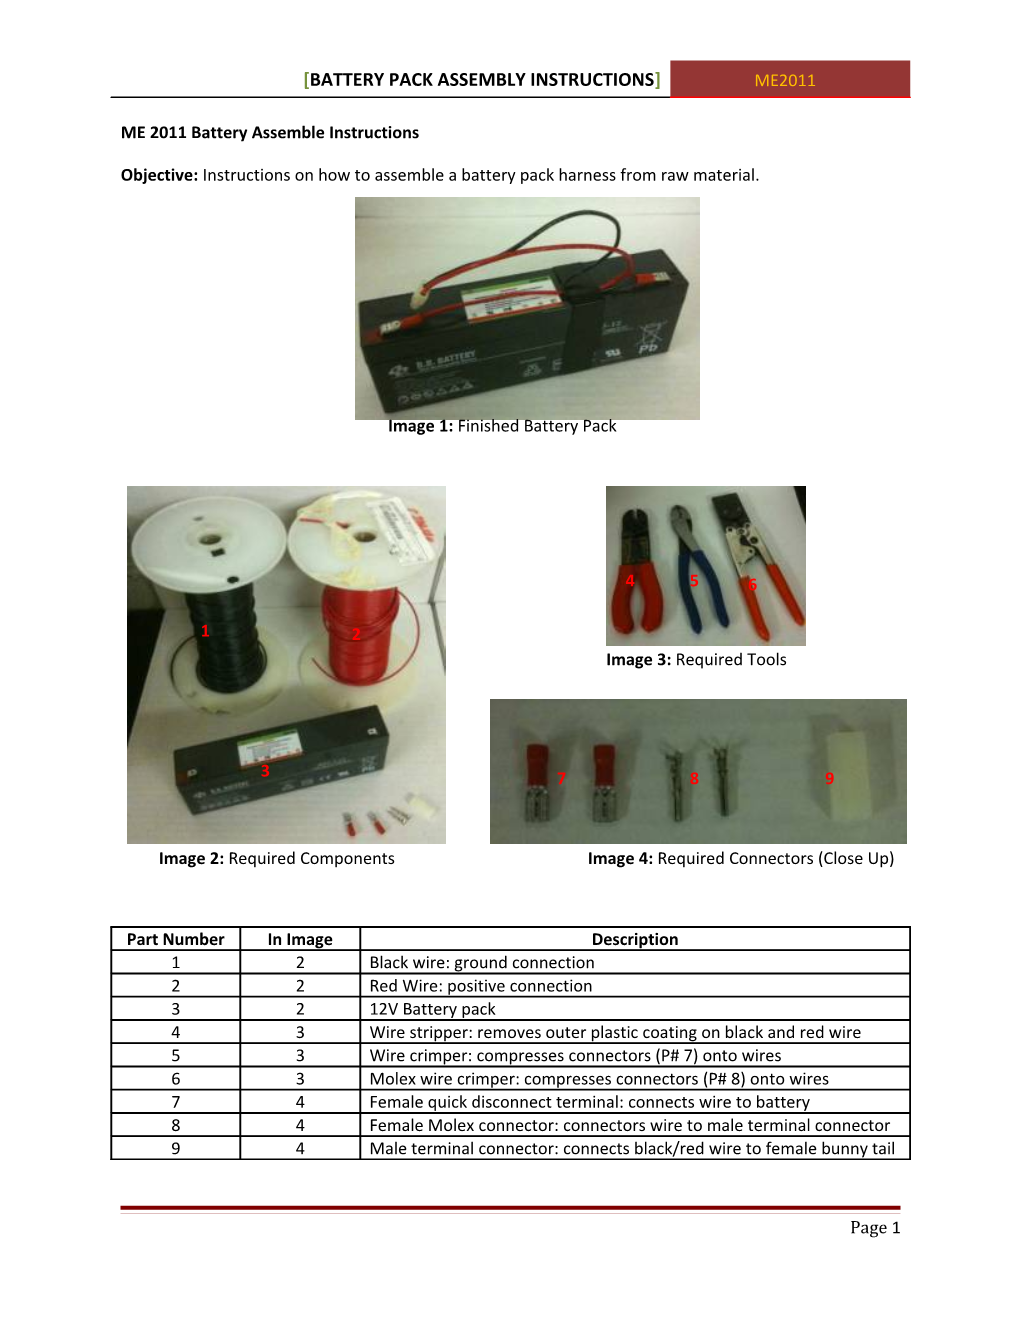 Battery Pack Assembly Instructions